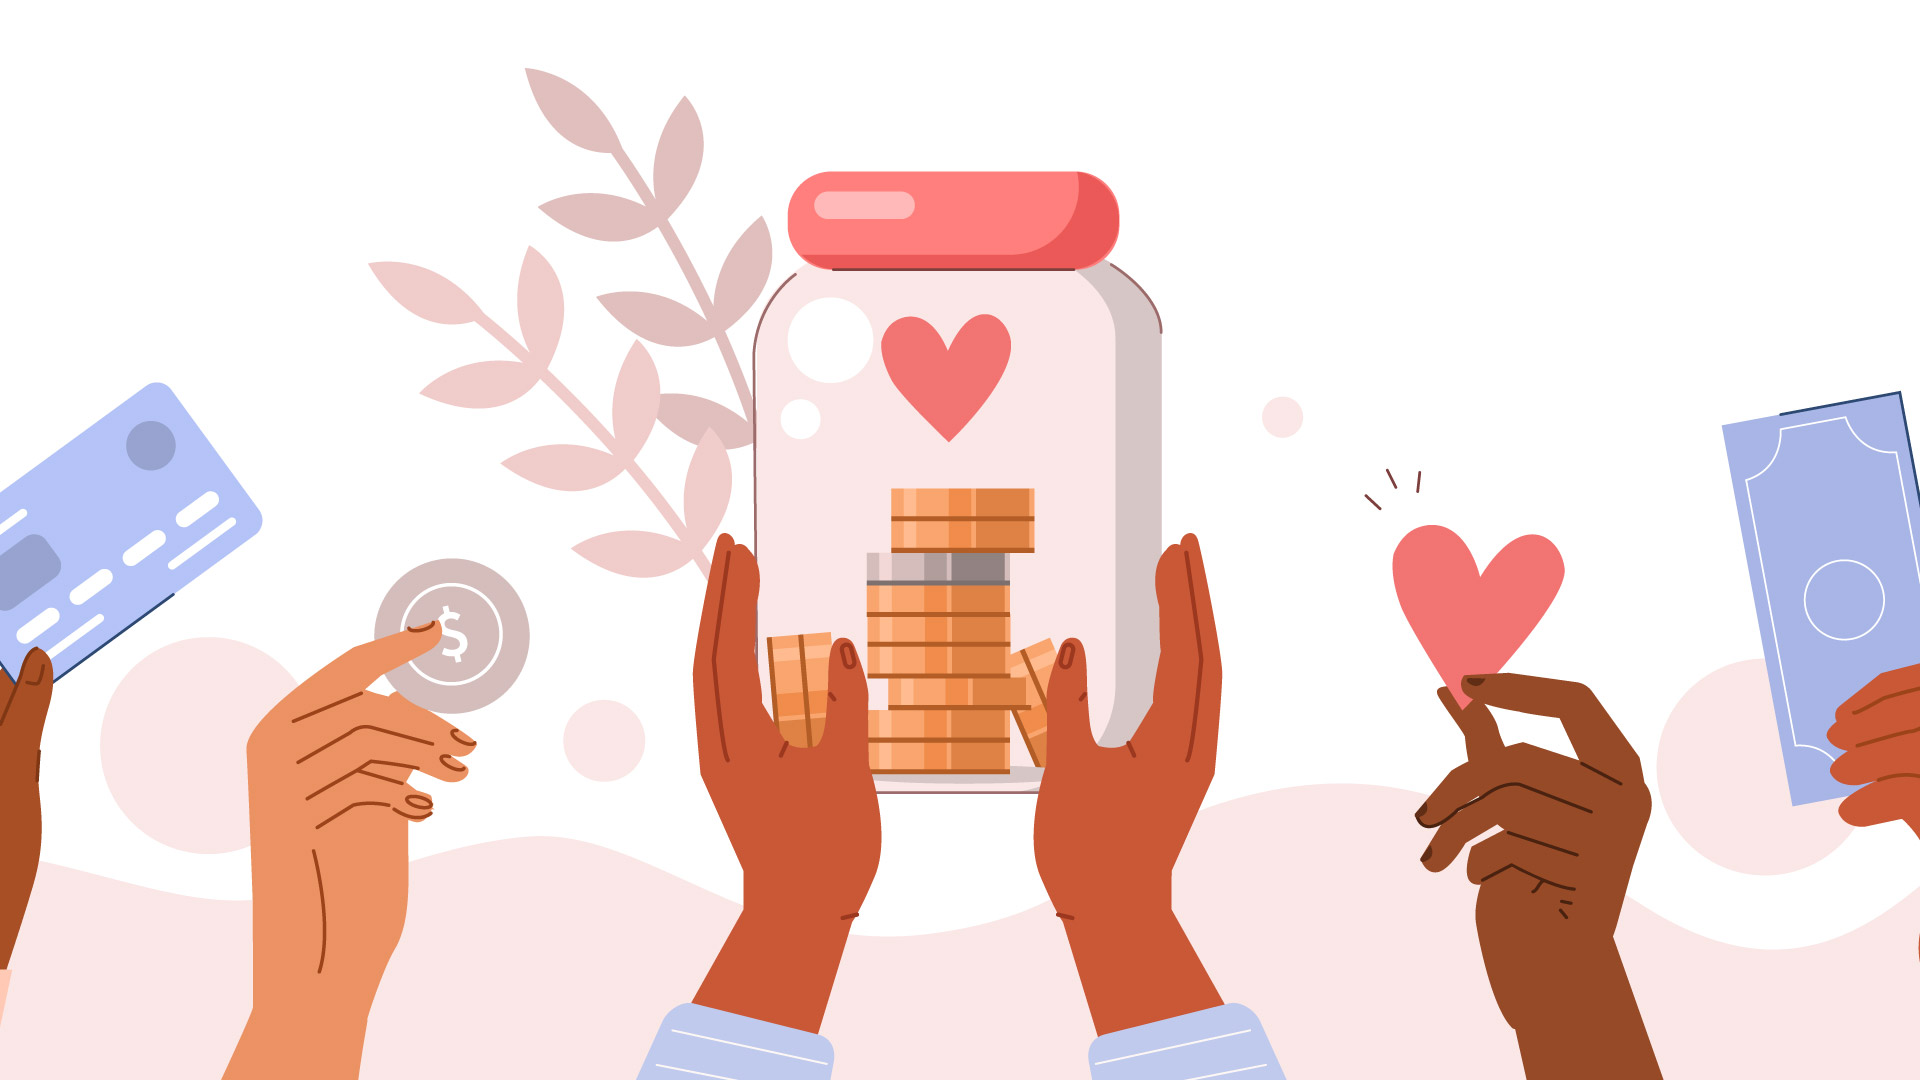 Illustration of hands giving hearts and money as representation of giving and donations.